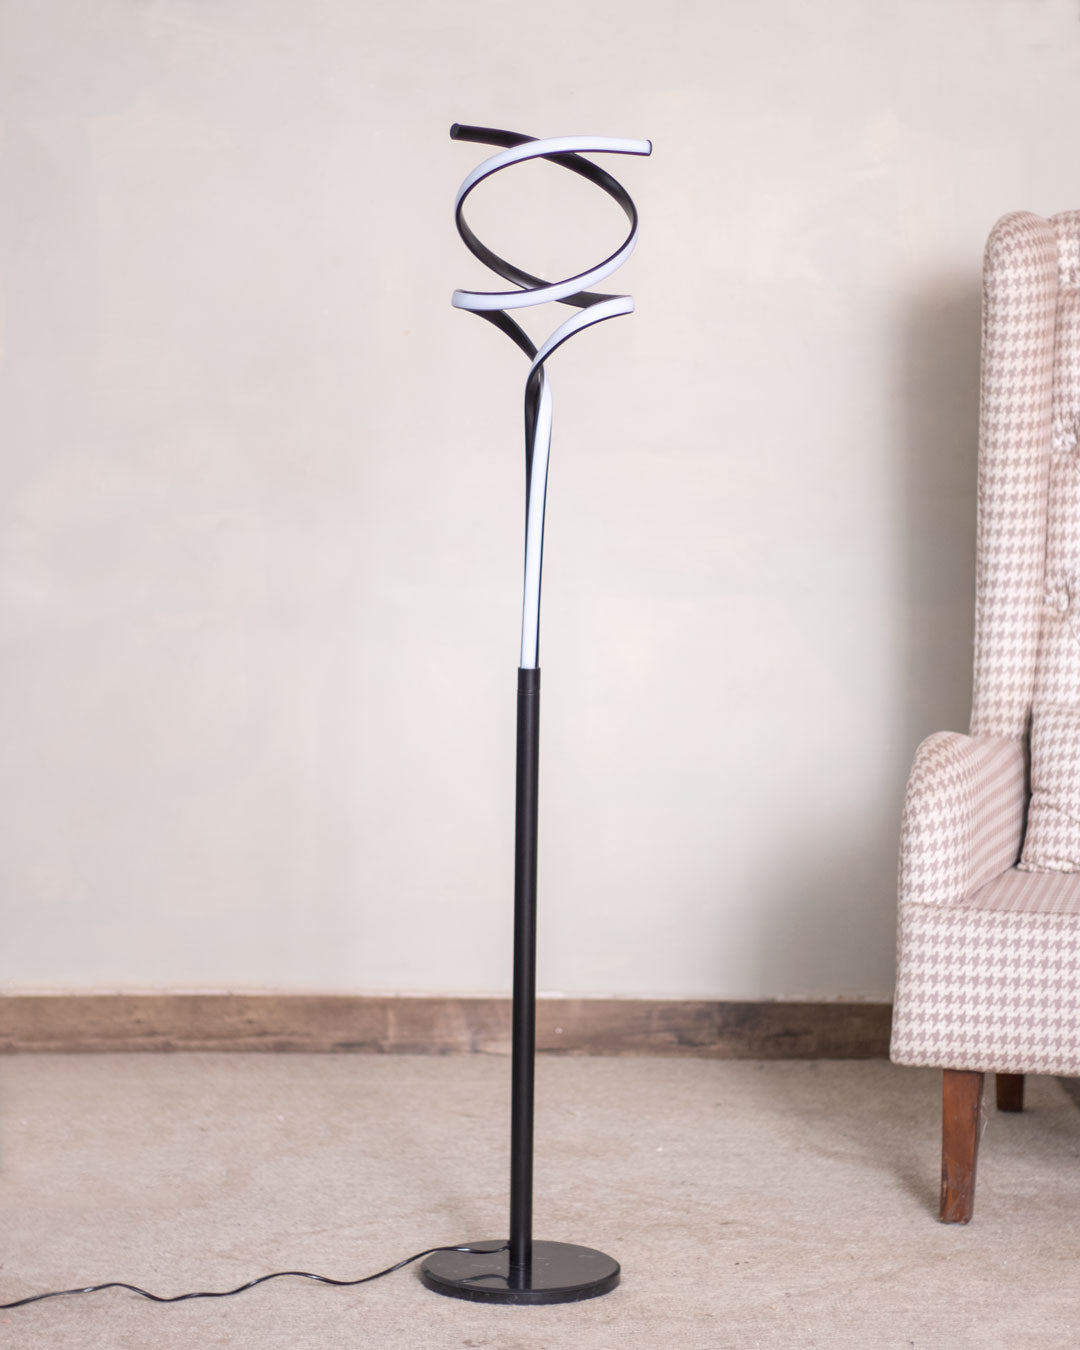 The Intertwined LED Floor Lamp